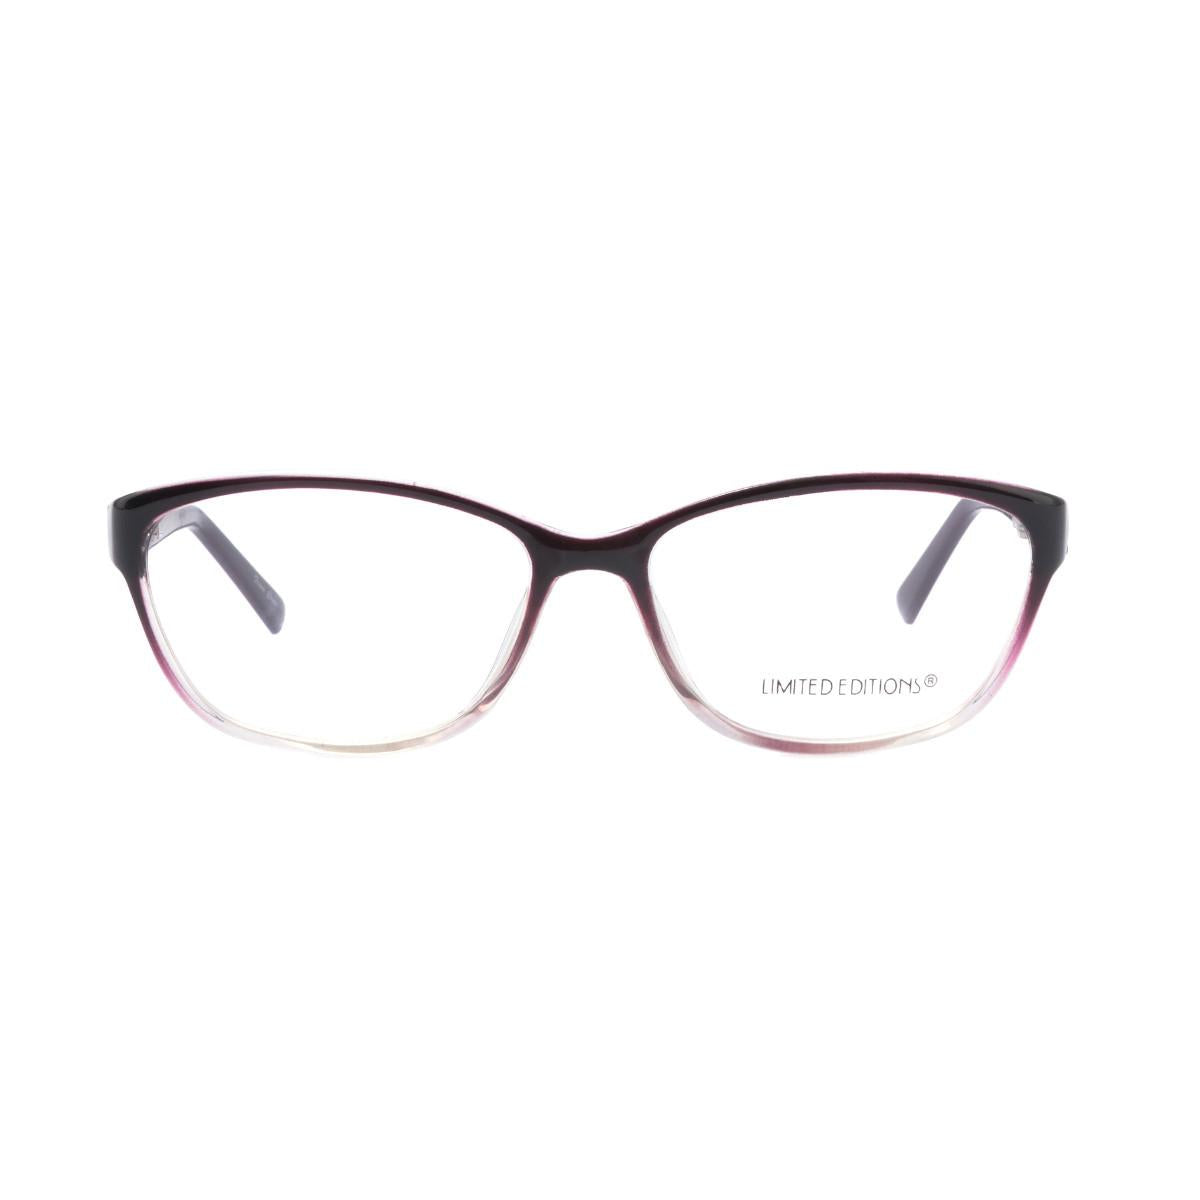 LIMITED EDITIONS 2010 Eyeglasses